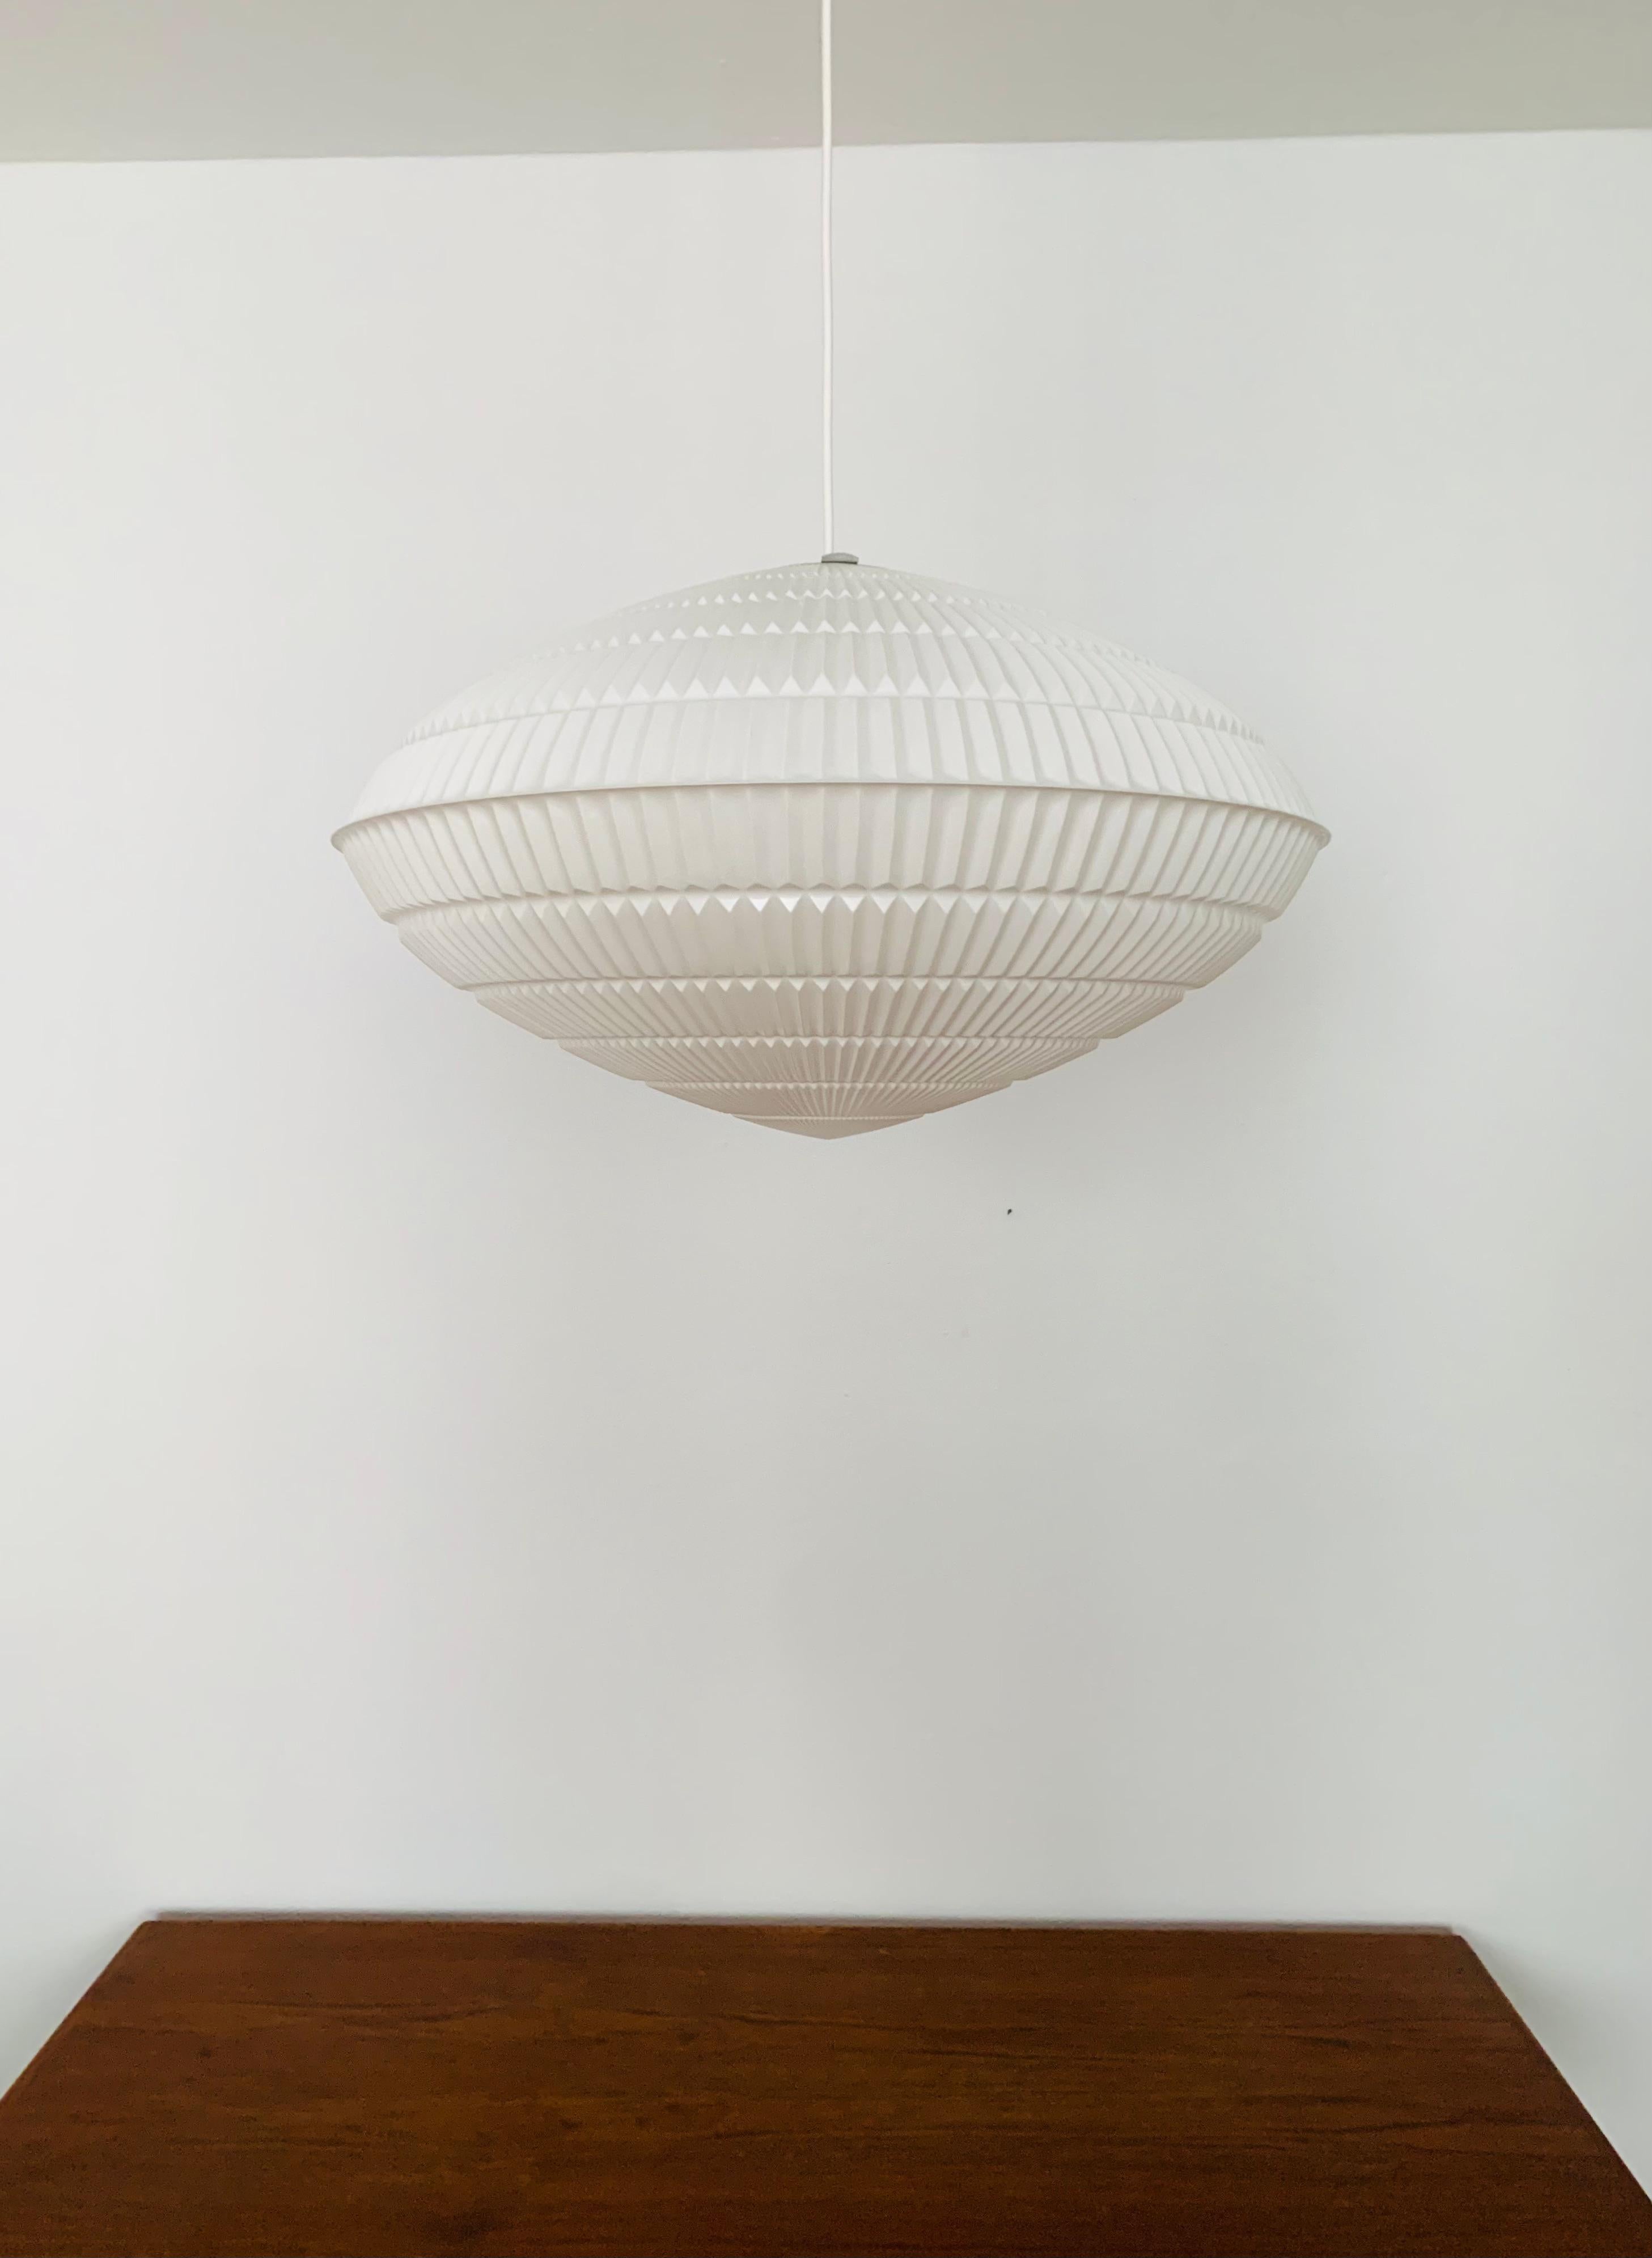  Origami pendant lamp by Aloys Gangkofner for Erco In Good Condition For Sale In München, DE